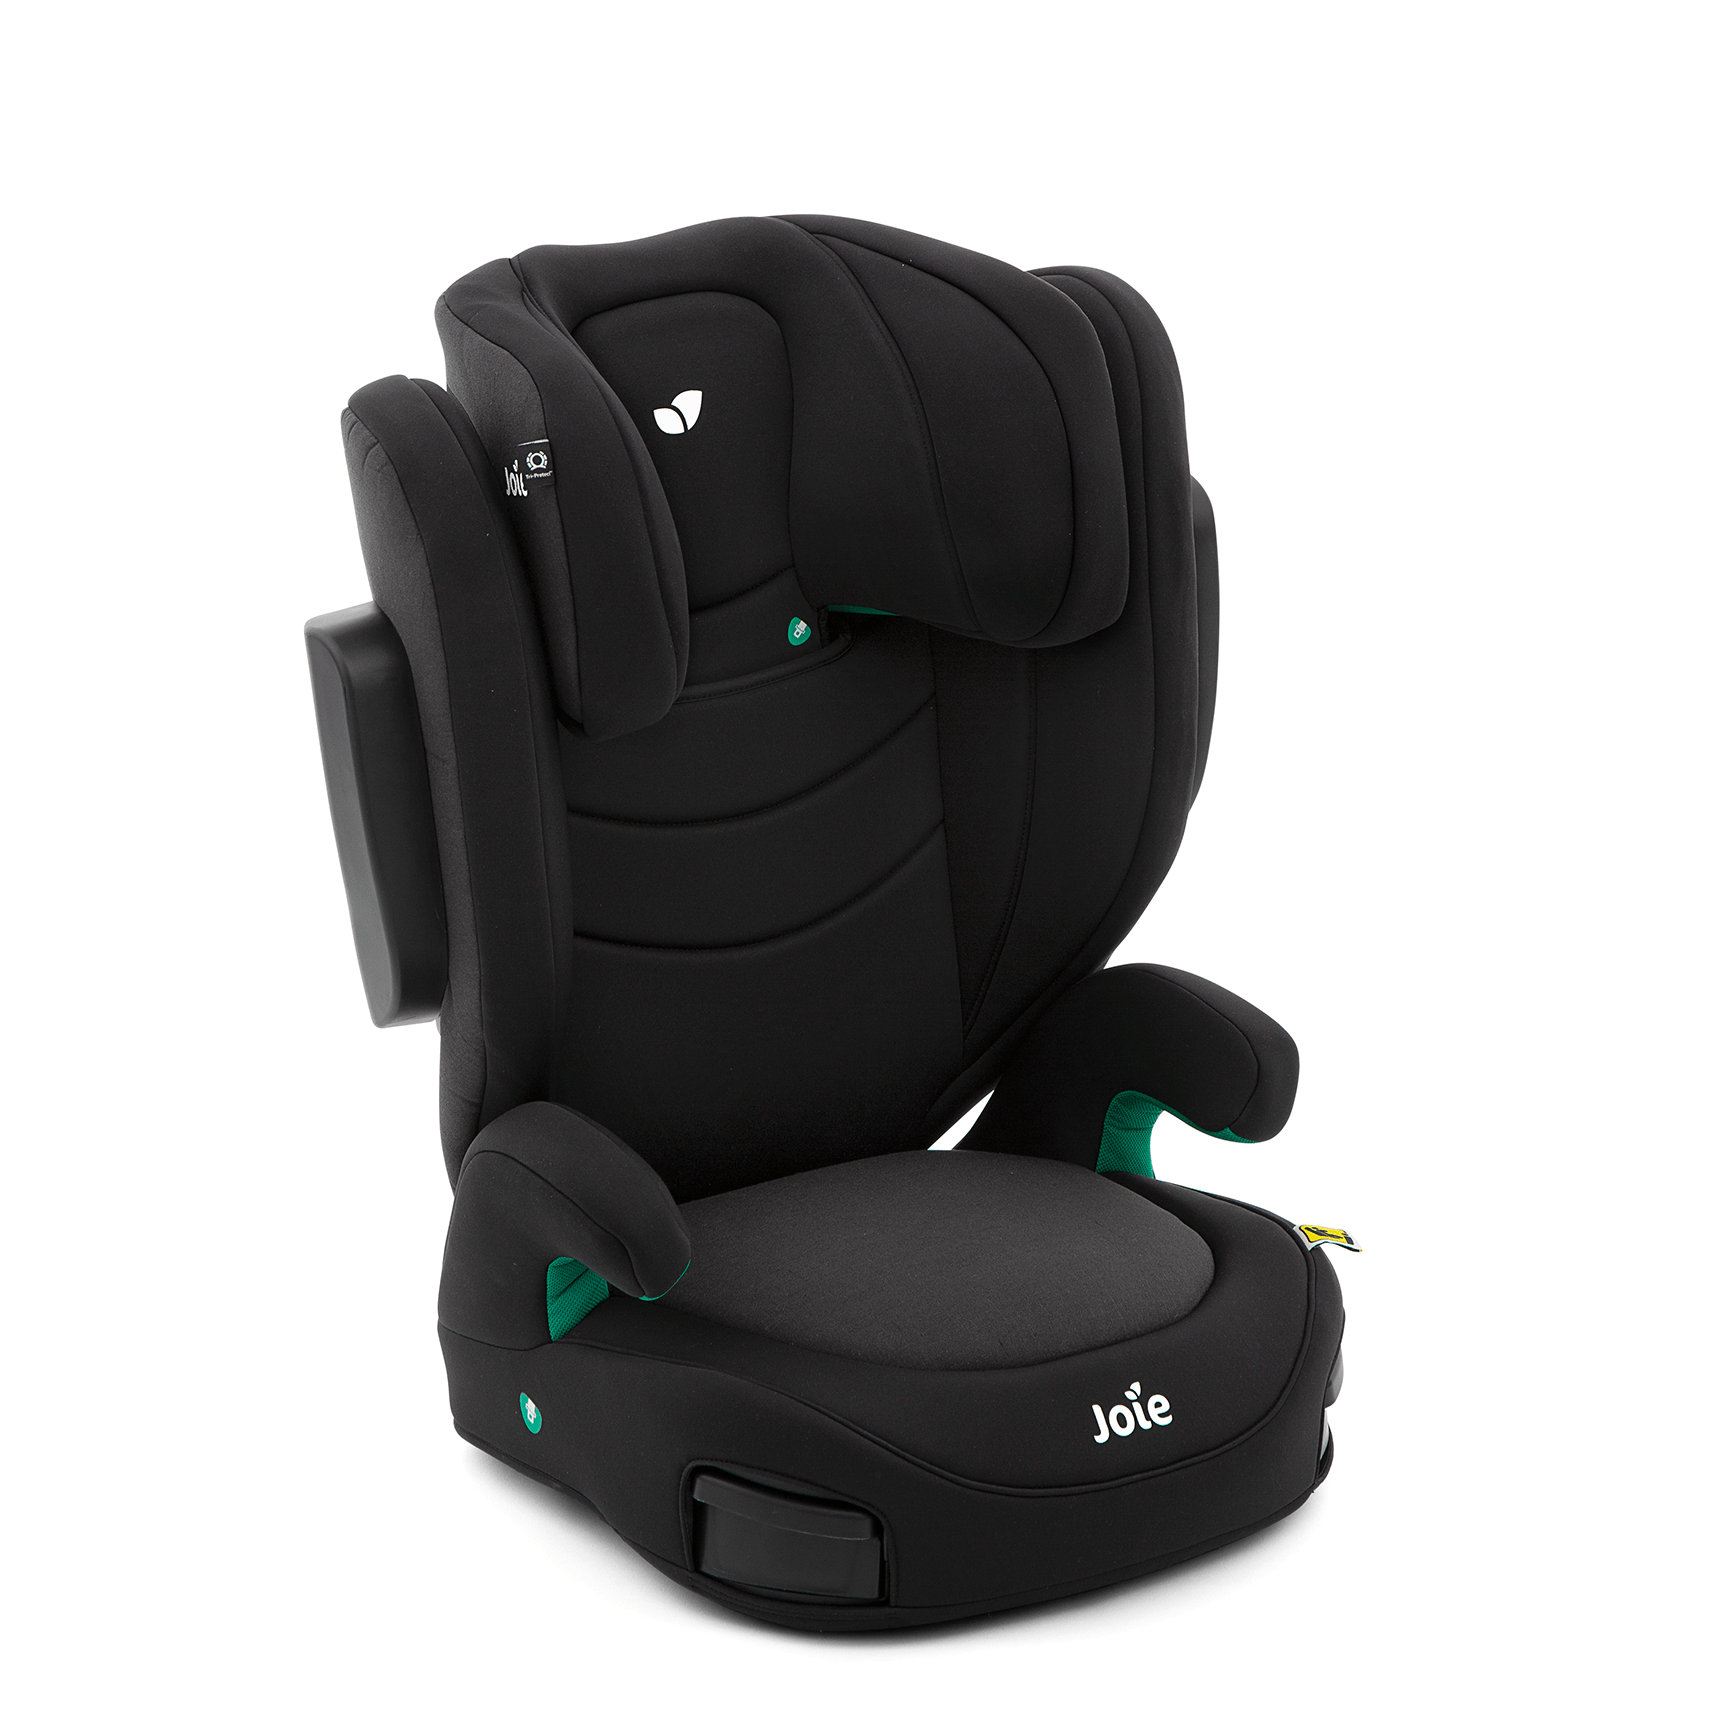 Joie baby car seats Joie i-Trillo Car Seat - Shale